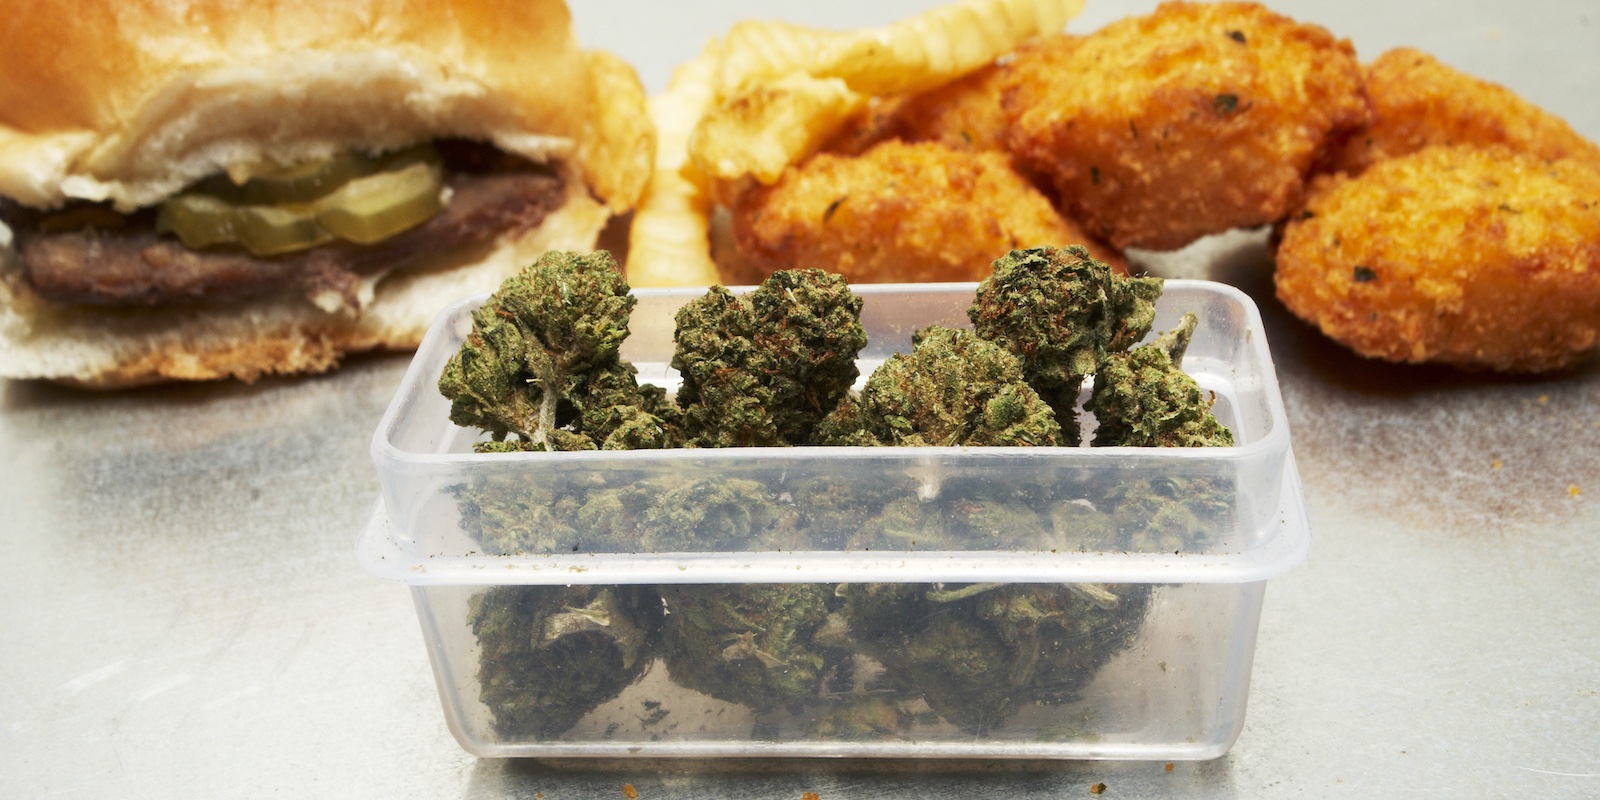 The munchies: cannabis and a craving for food